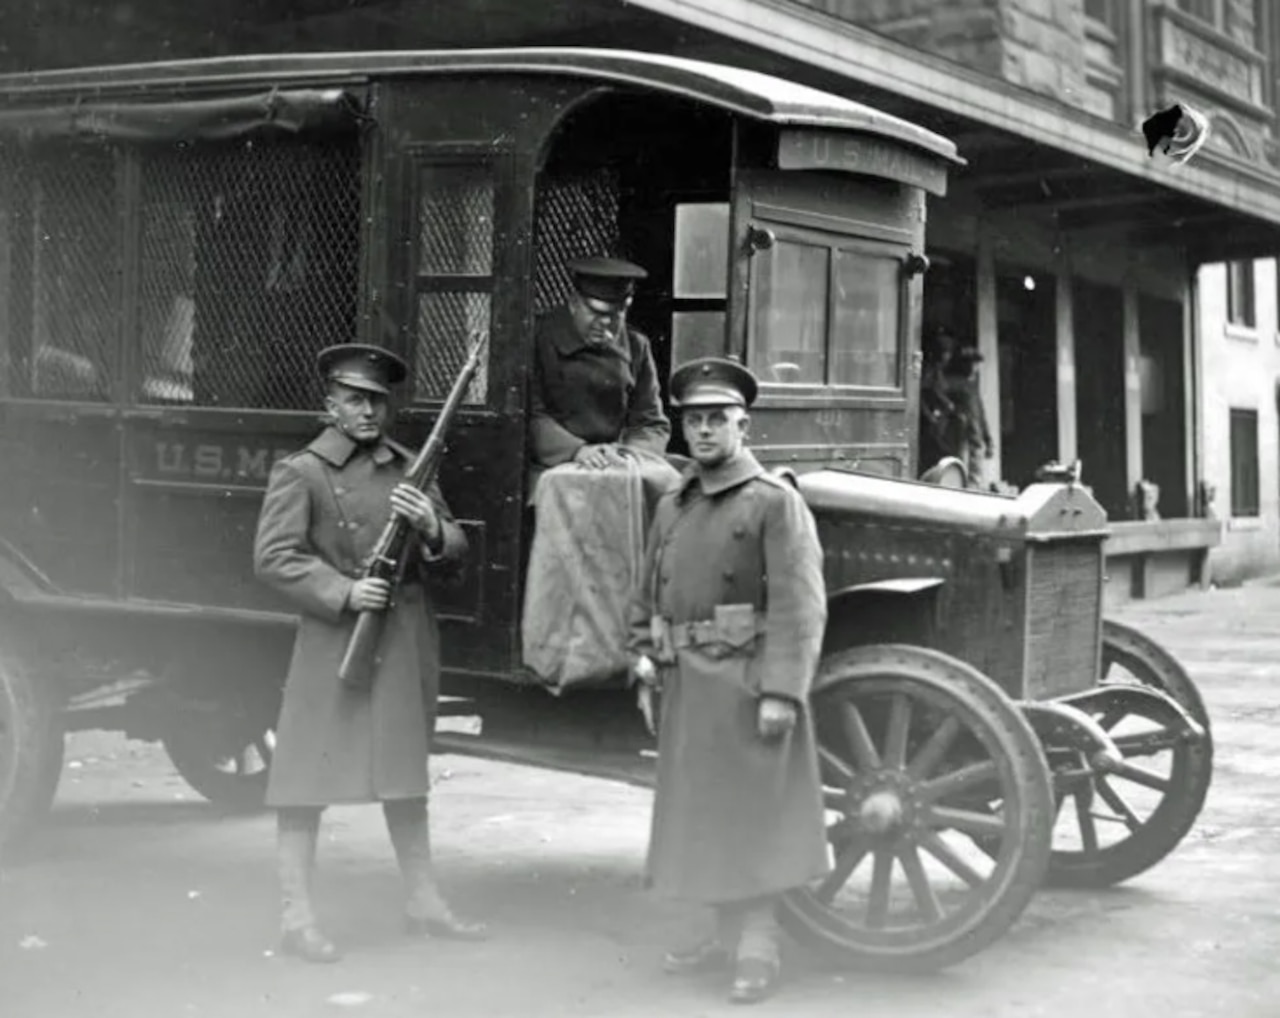 Armed Marines stand beside mail delivery truck.